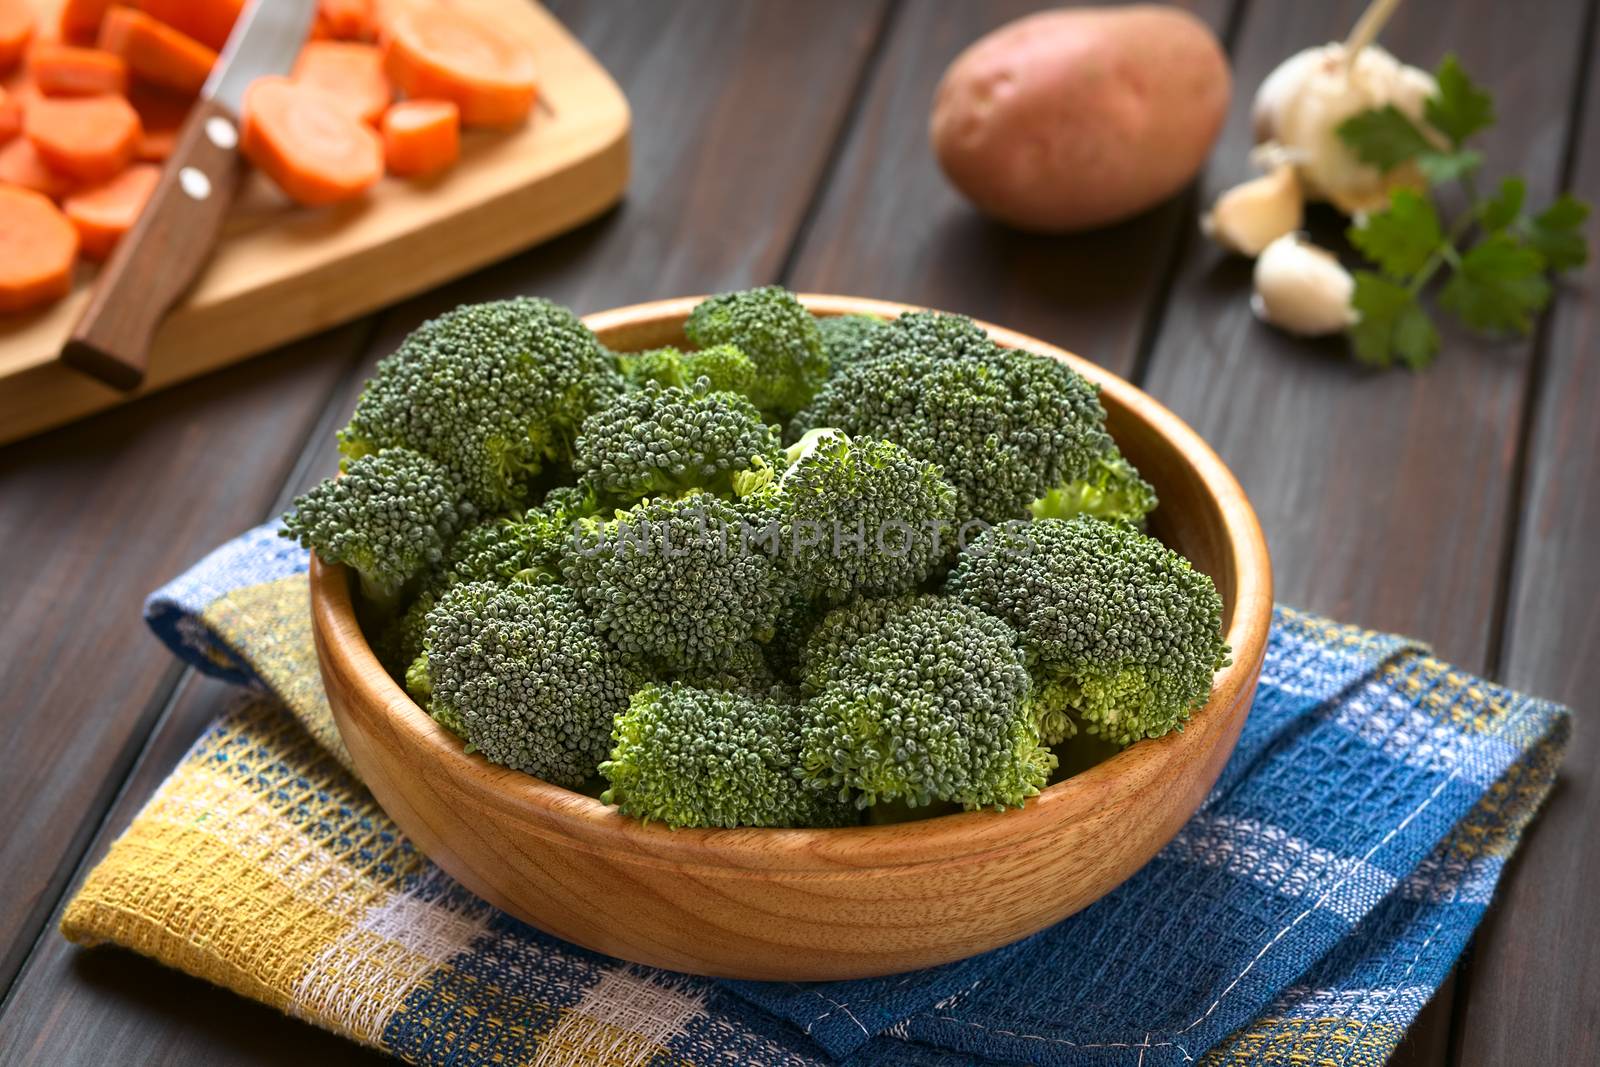 Fresh raw broccoli florets in wooden bowl with carrot slices on wooden board, potato, garlic and parsley in the back, photographed on dark wood with natural light (Selective Focus, Focus one third into the broccoli)